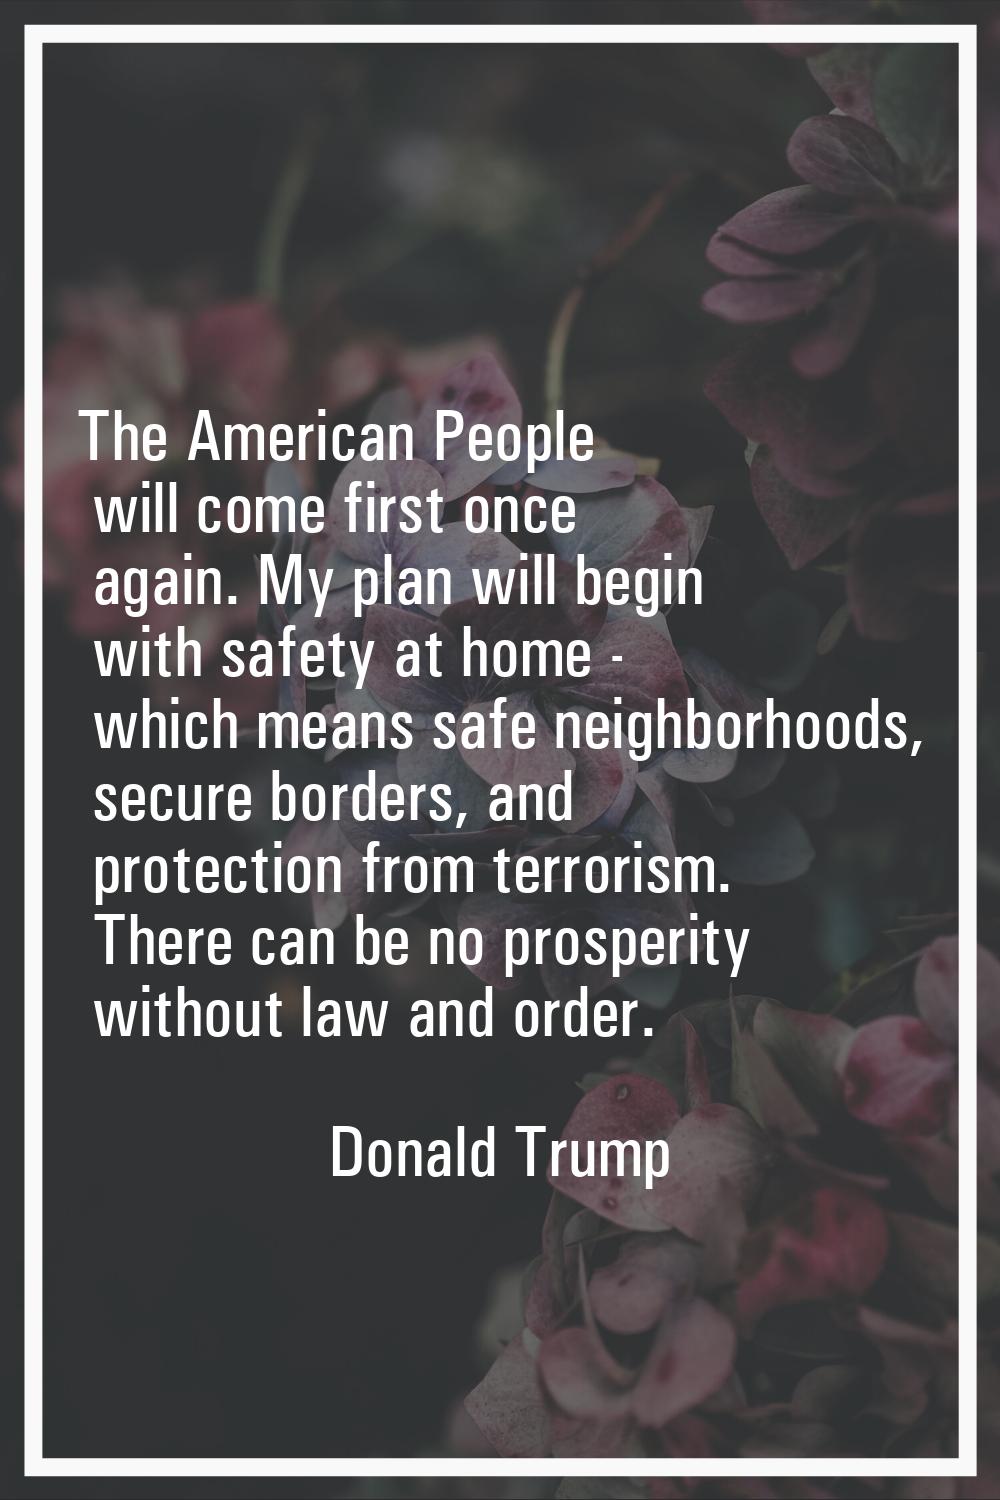 The American People will come first once again. My plan will begin with safety at home - which mean